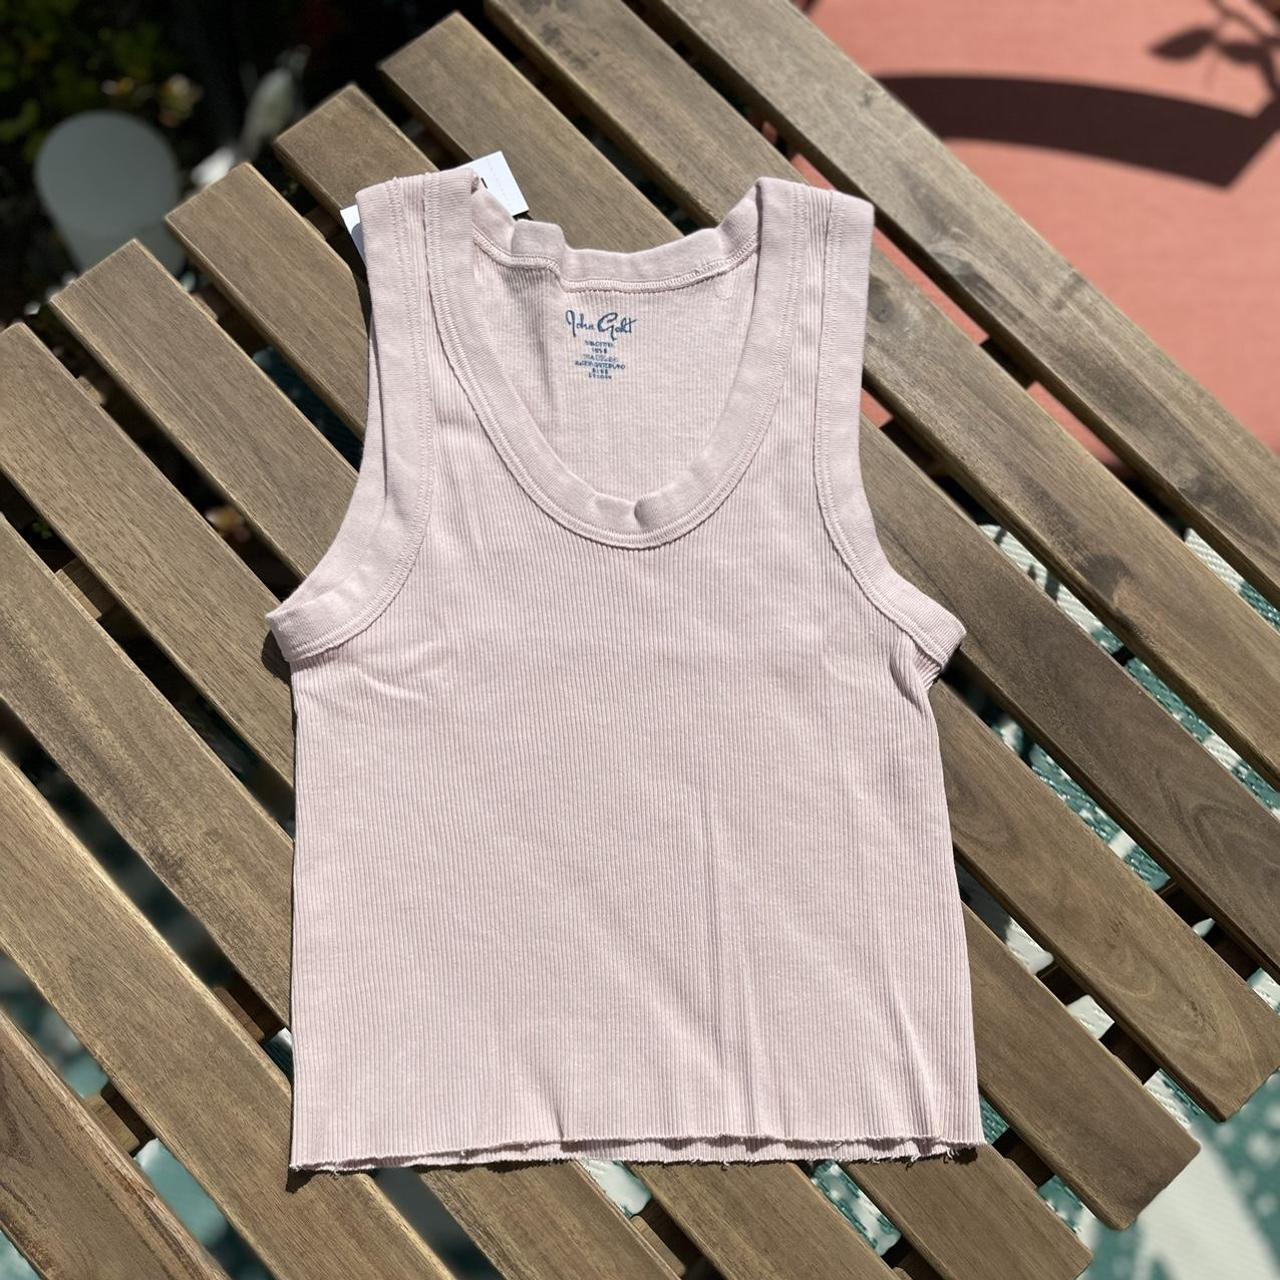 Brandy melville pink connor tank - Classic style - - Depop